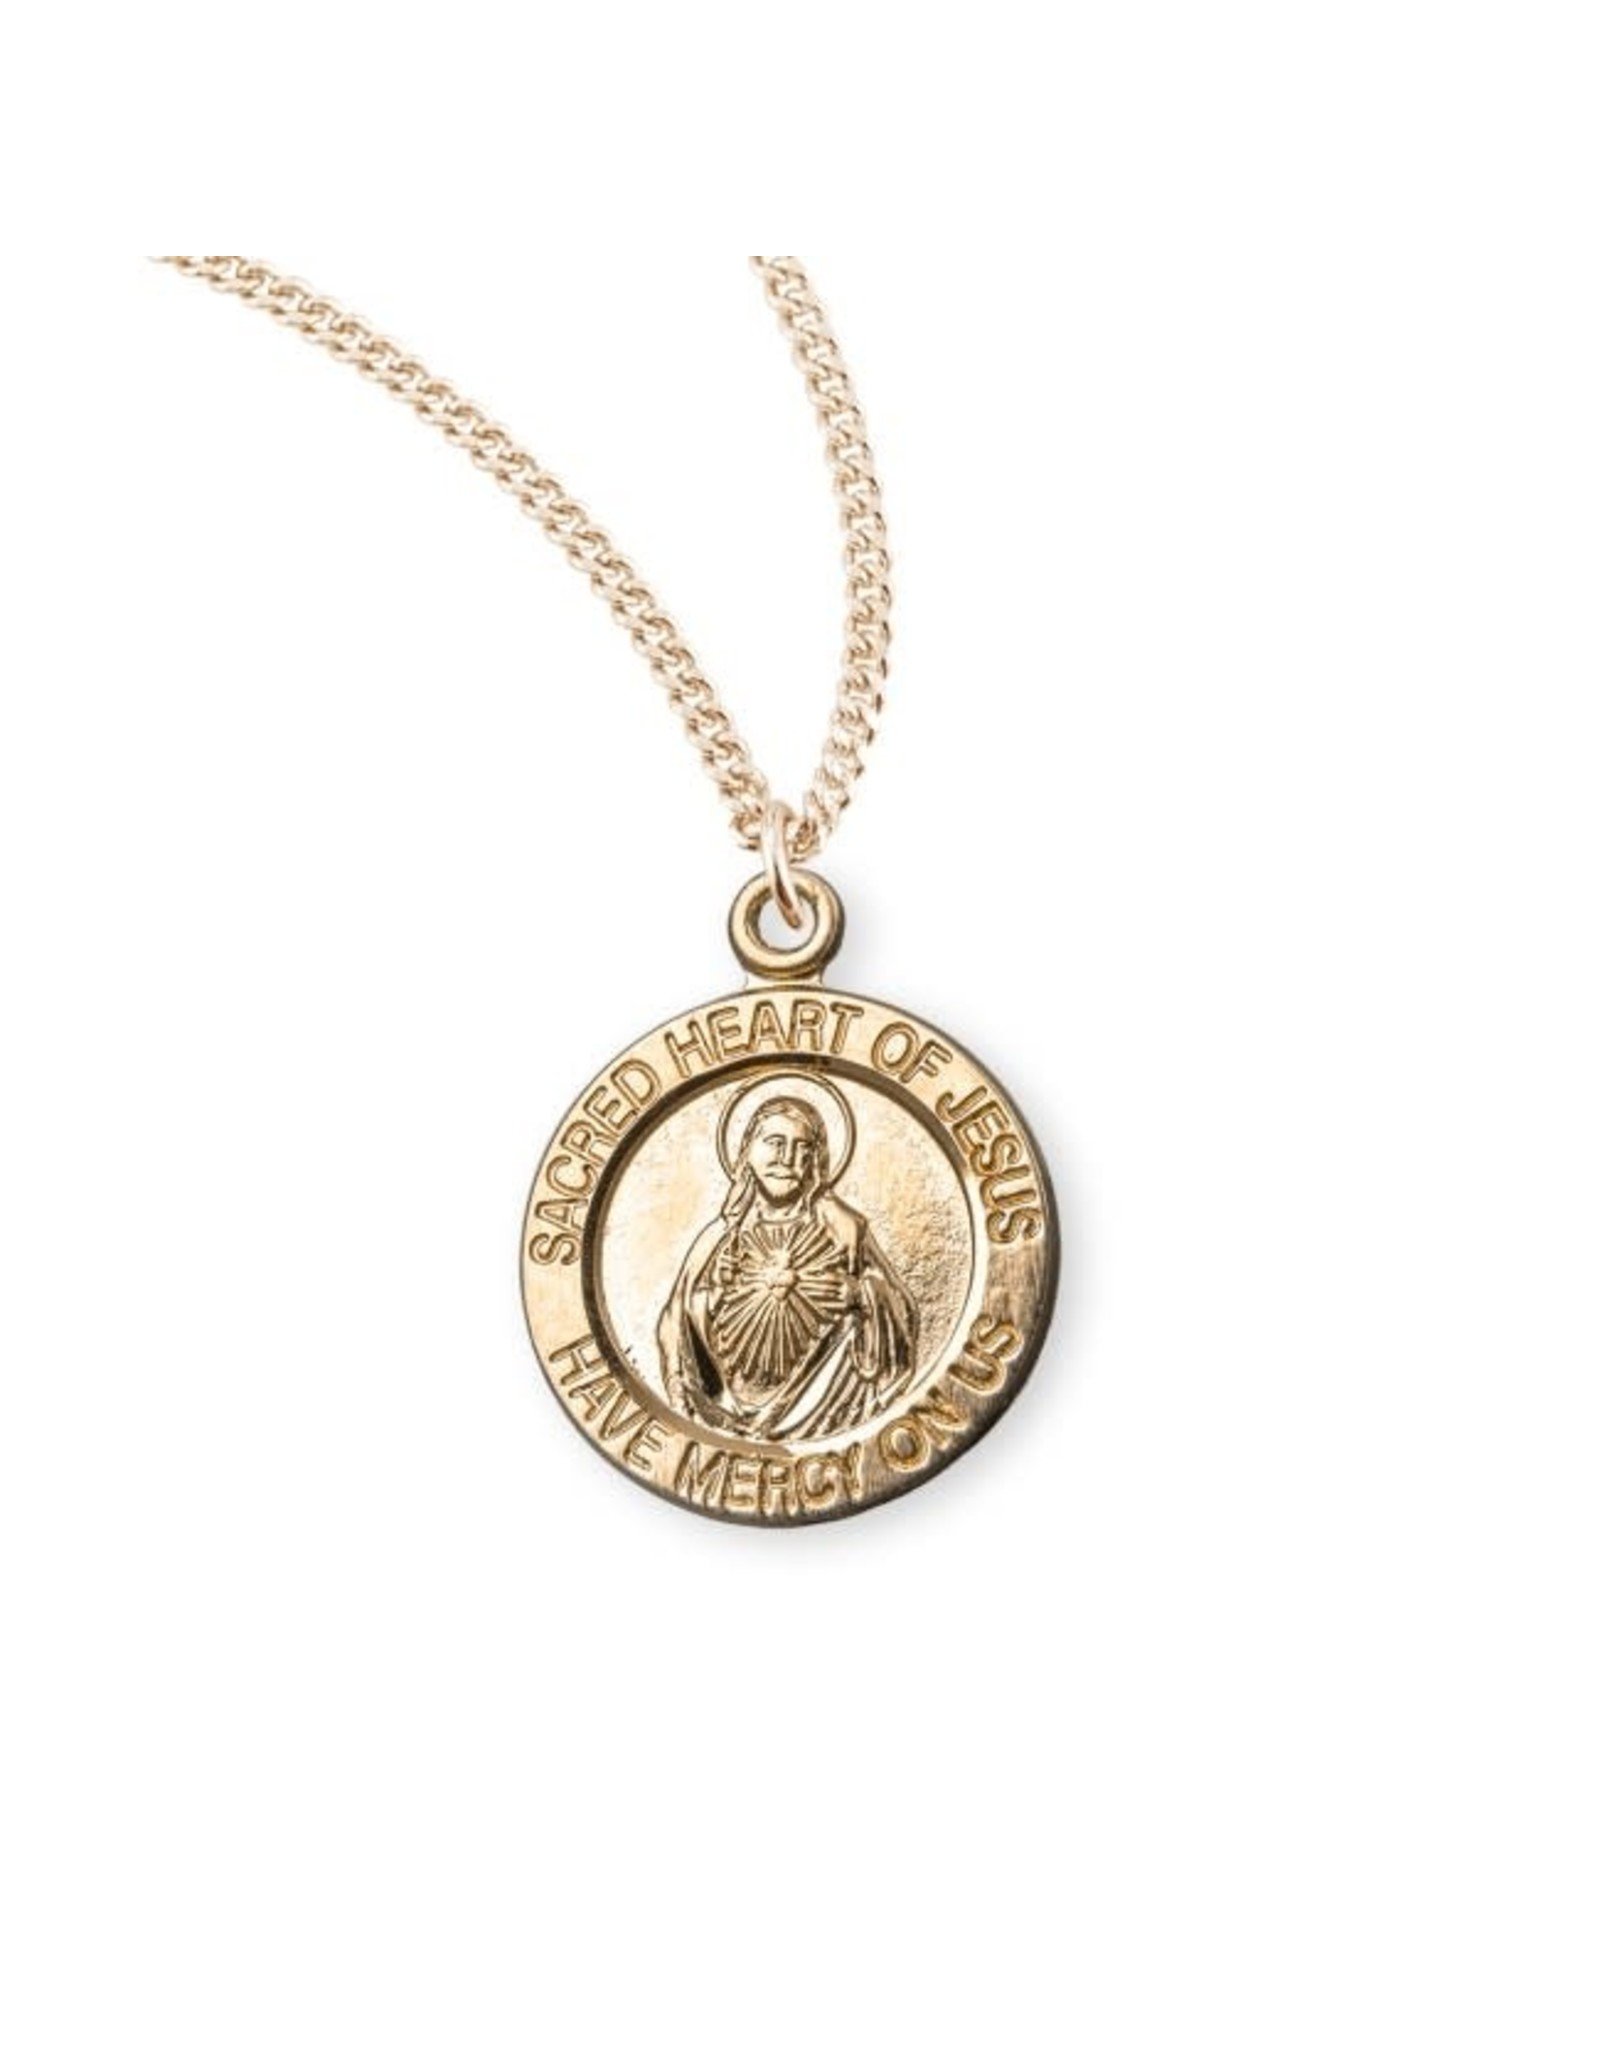 HMH 16 Karat Gold Over Sterling Silver Small Round Sacred Heart of Jesus Medal on 18” Chain, Boxed